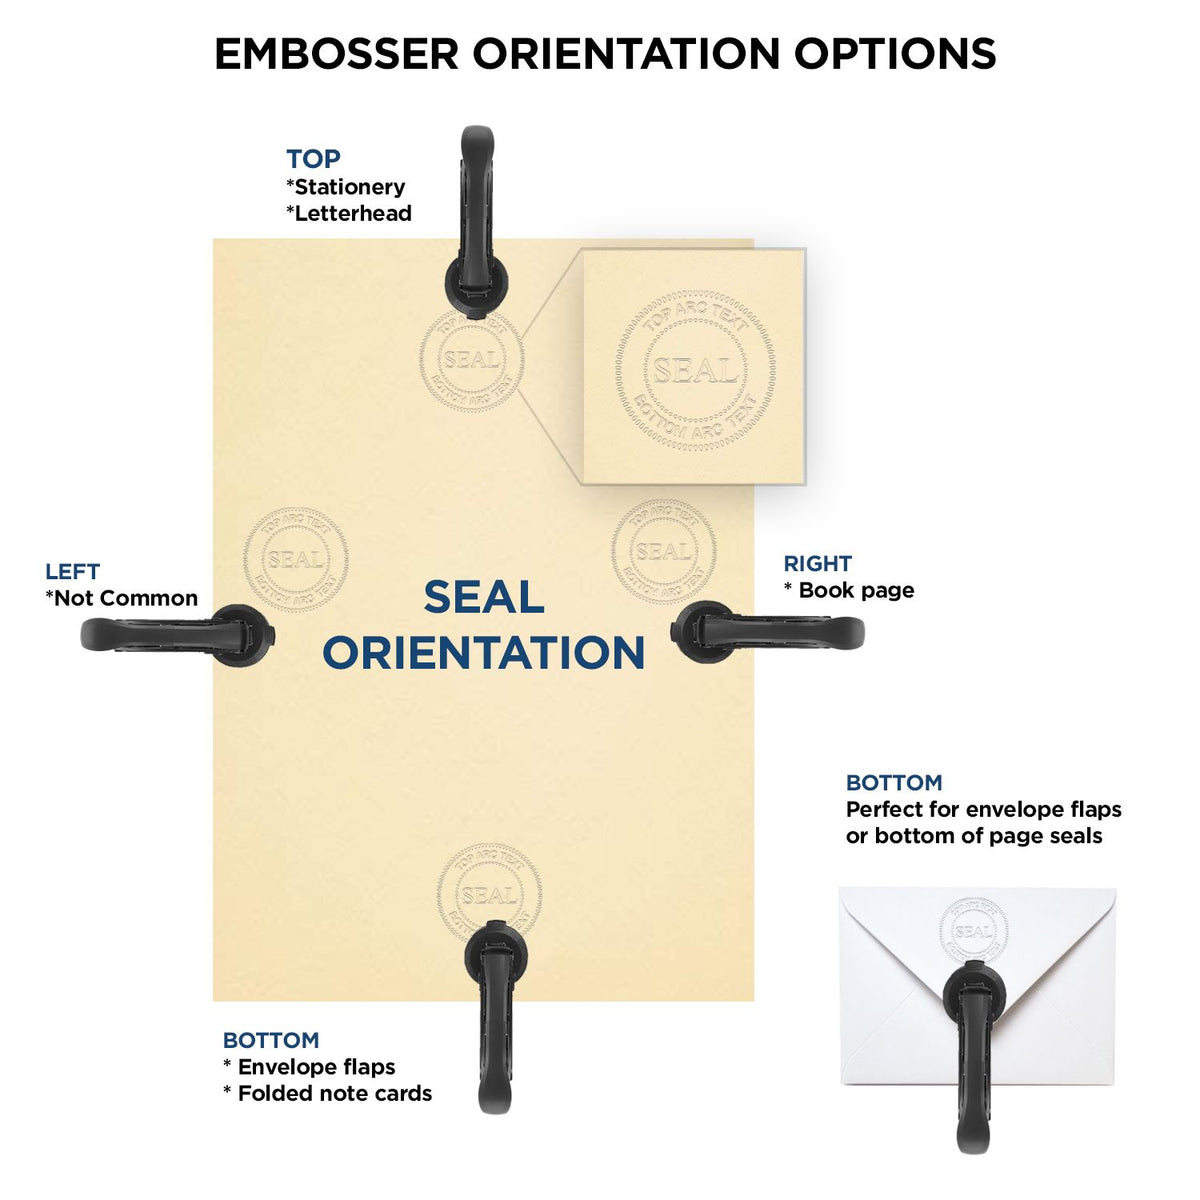 An infographic for the State of South Dakota Soft Land Surveyor Embossing Seal showing embosser orientation, this is showing examples of a top, bottom, right and left insert.